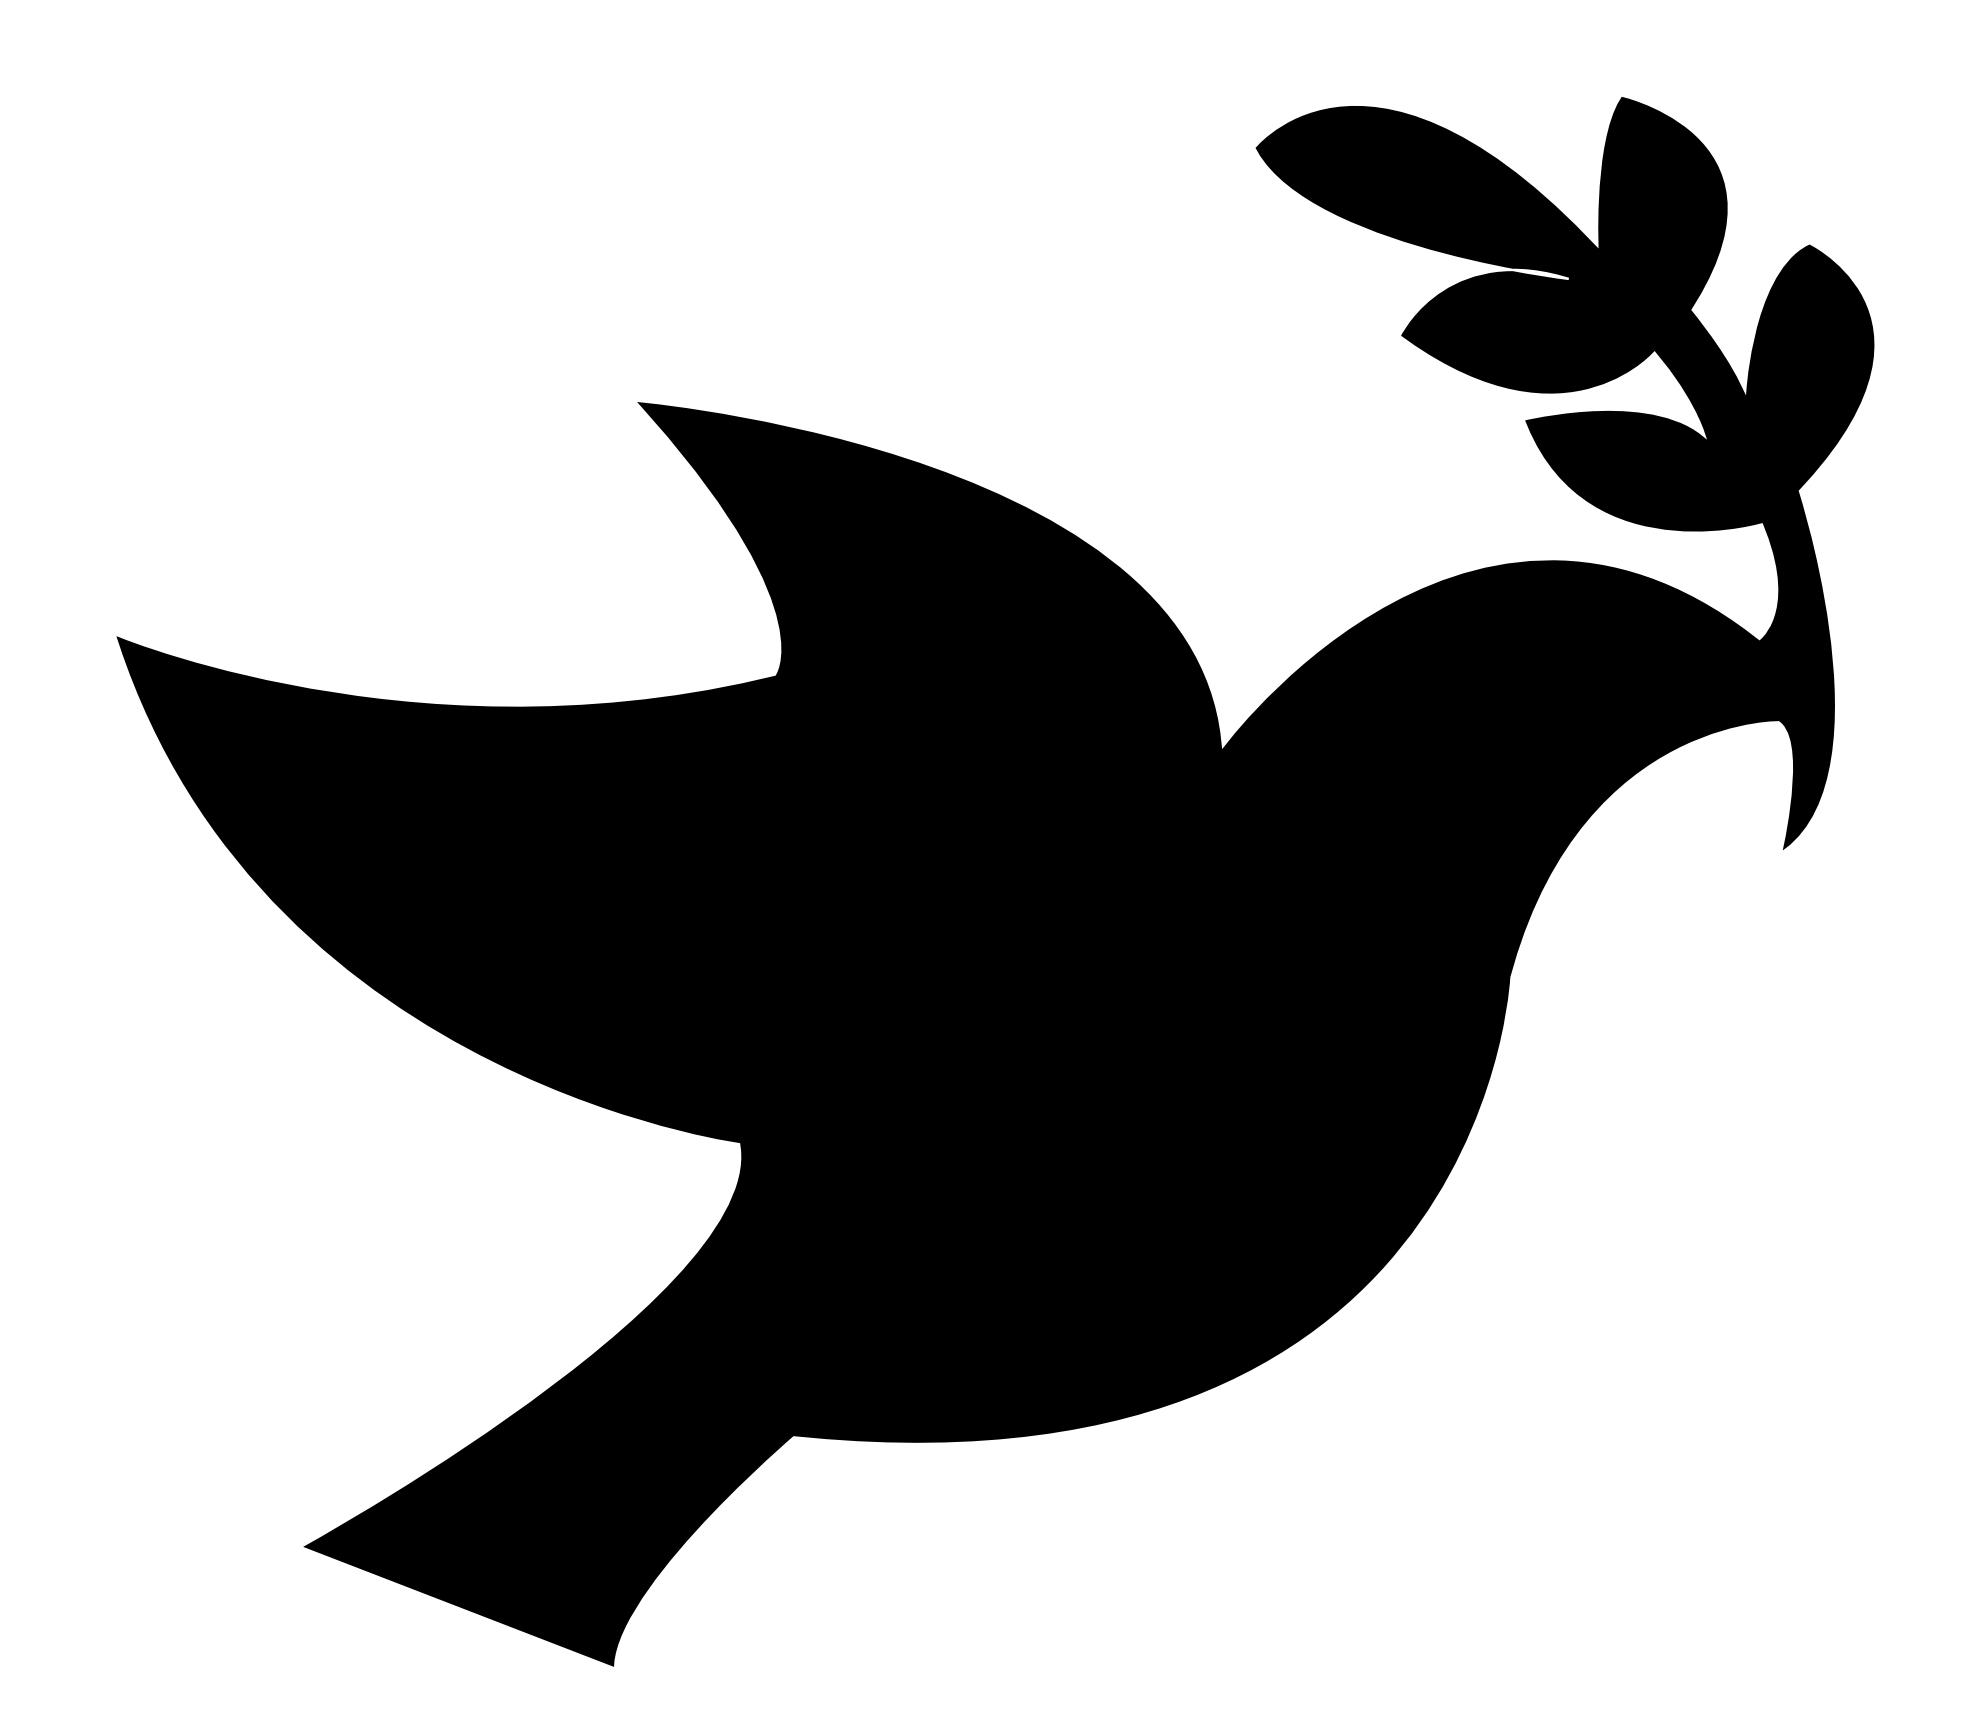 Dove shape free on. Welding clipart silhouette